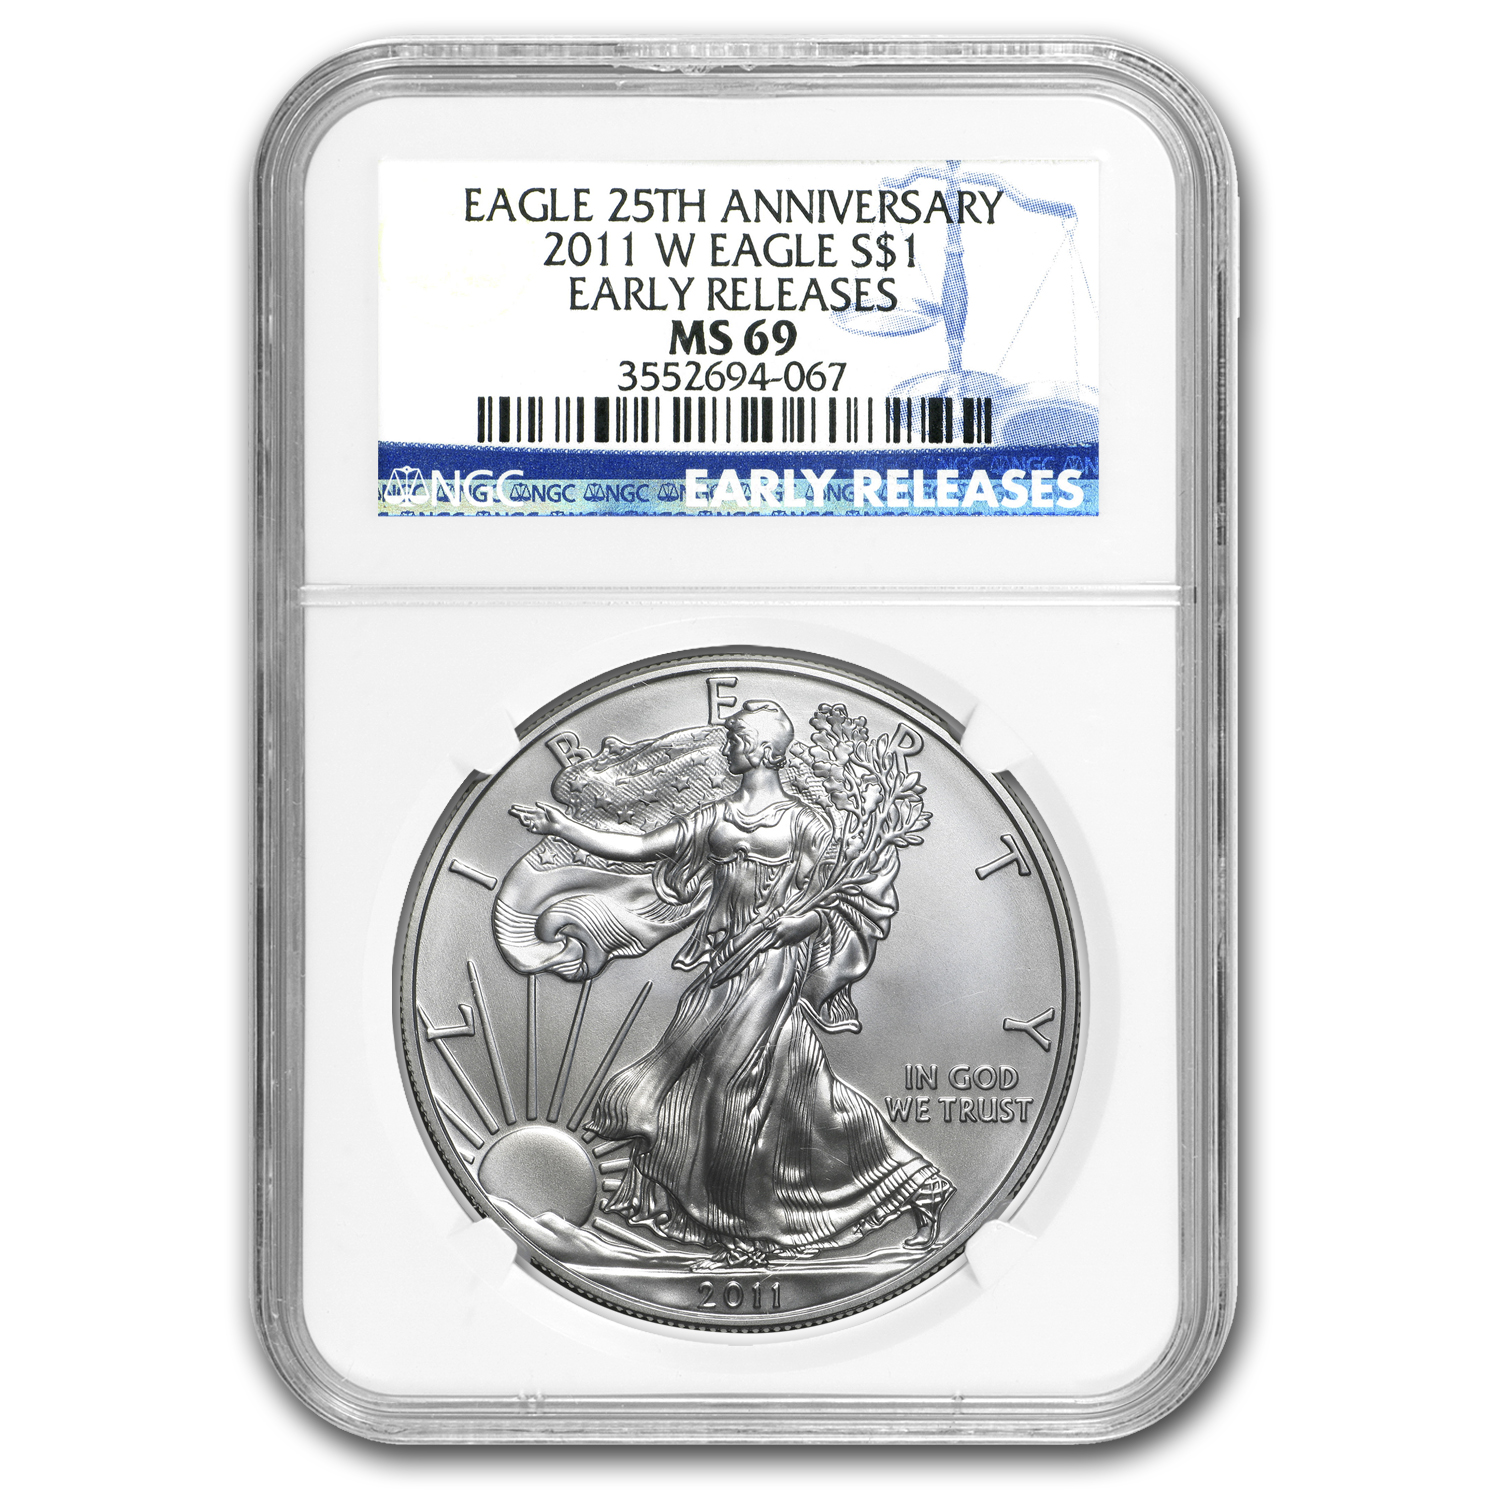 Details about   2011 AMERICAN SILVER EAGLE 25TH ANNIVERSARY NGC MS 69 EARLY RELEASES BLUE LABEL 